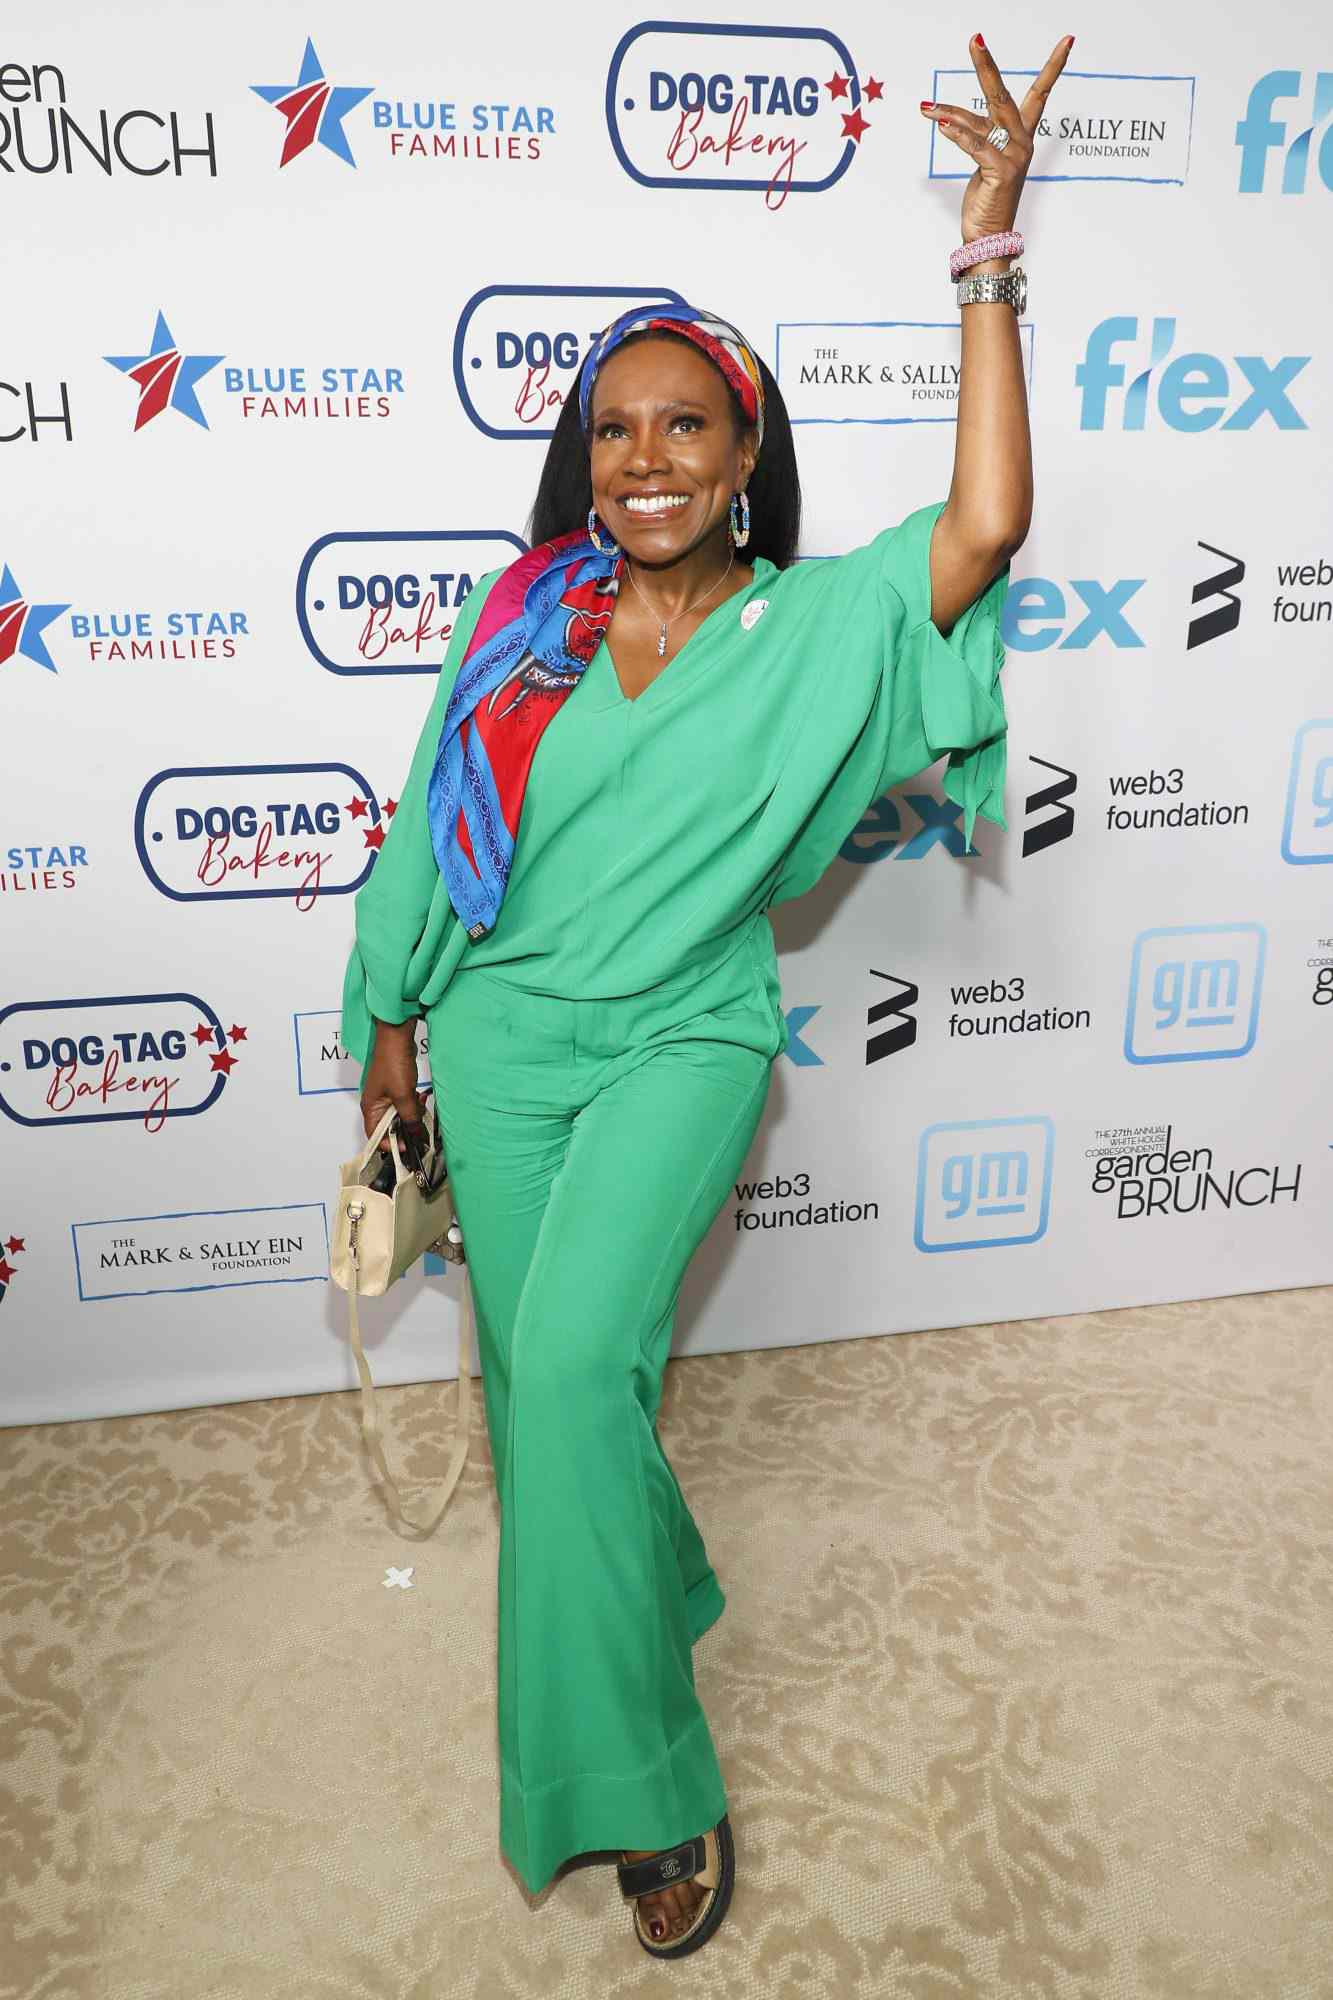 WASHINGTON, DC - APRIL 30: Sheryl Lee Ralph attends the 27th Annual White House Correspondents' Weekend Garden Brunch on April 30, 2022 in Washington, DC. (Photo by Paul Morigi/Getty Images for White House Correspondents Insider )